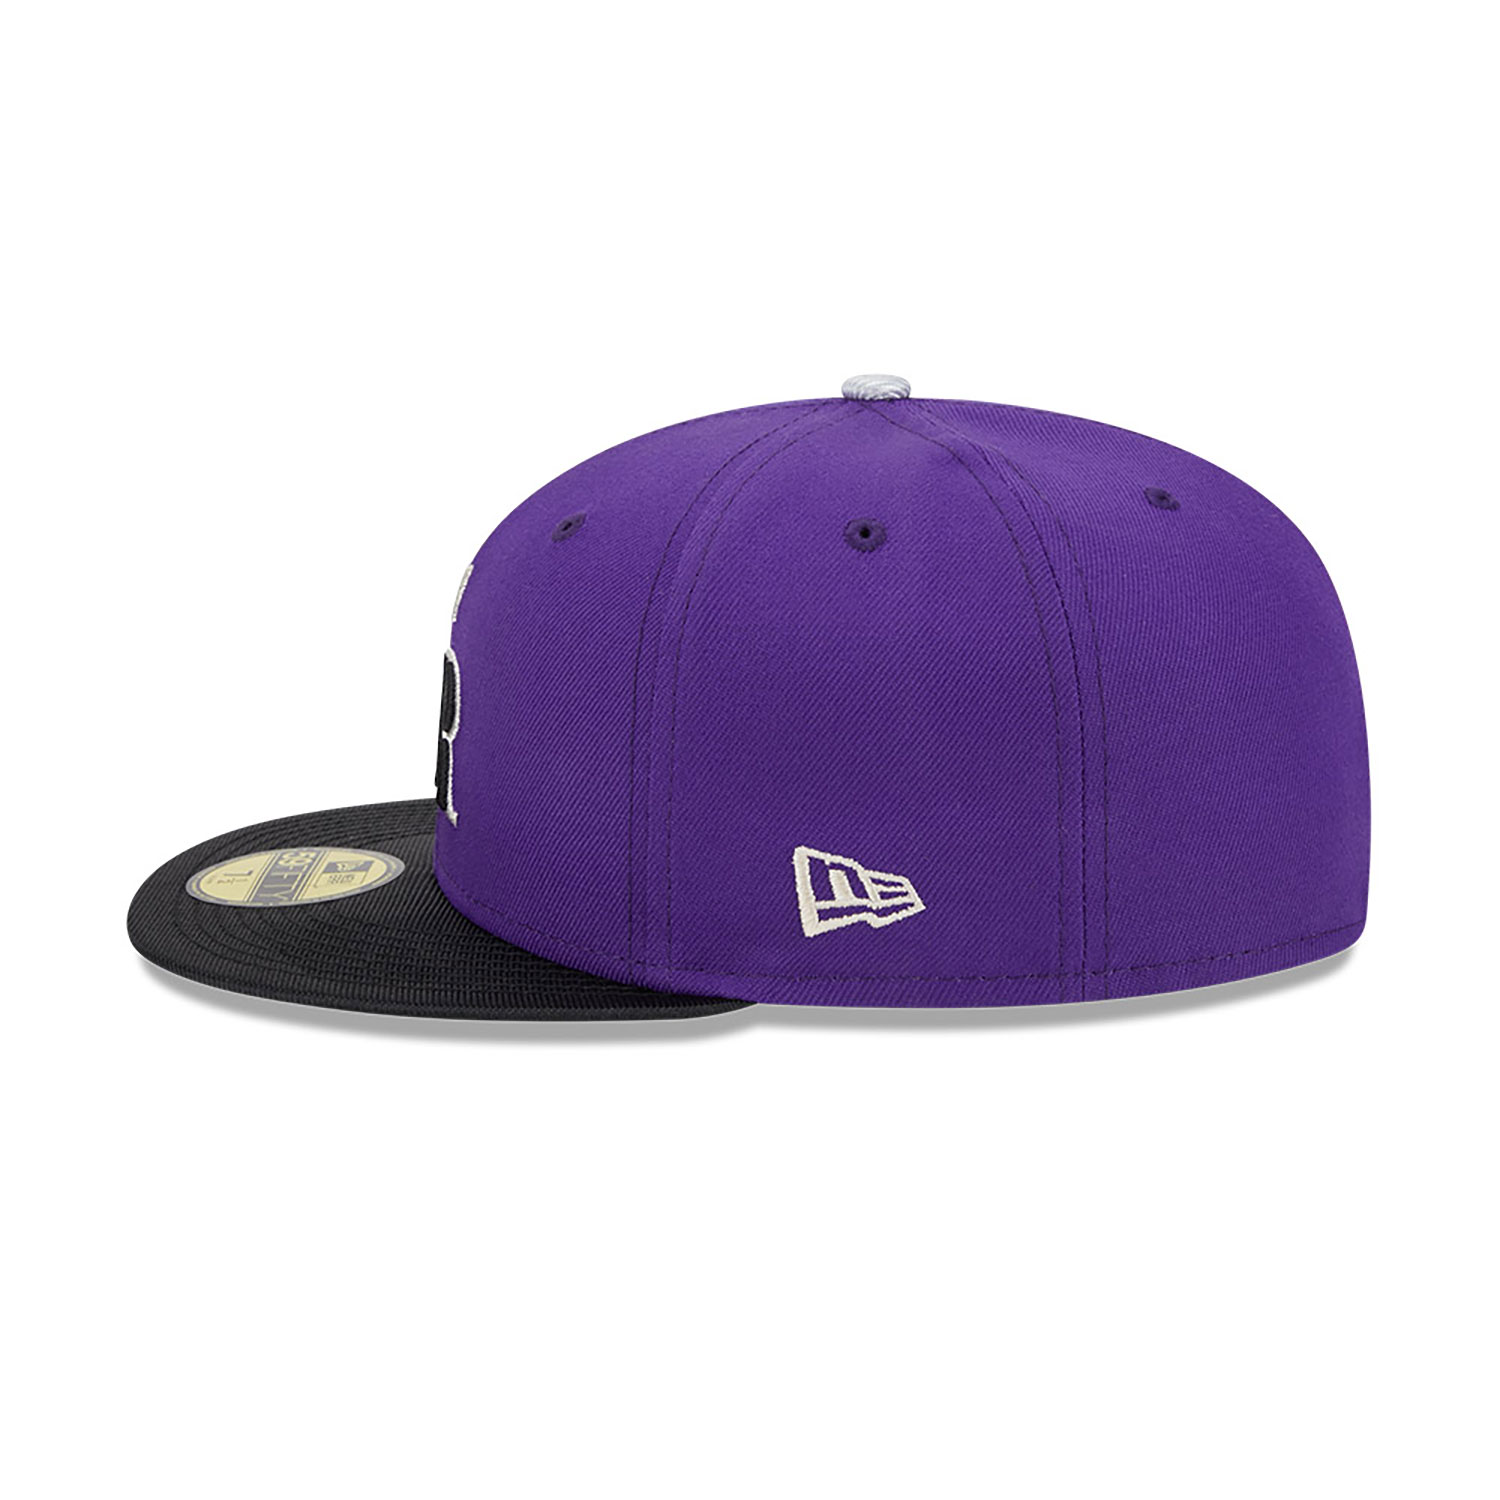 Lila Colorado Rockies Team Shimmer 59FIFTY Fitted Cap